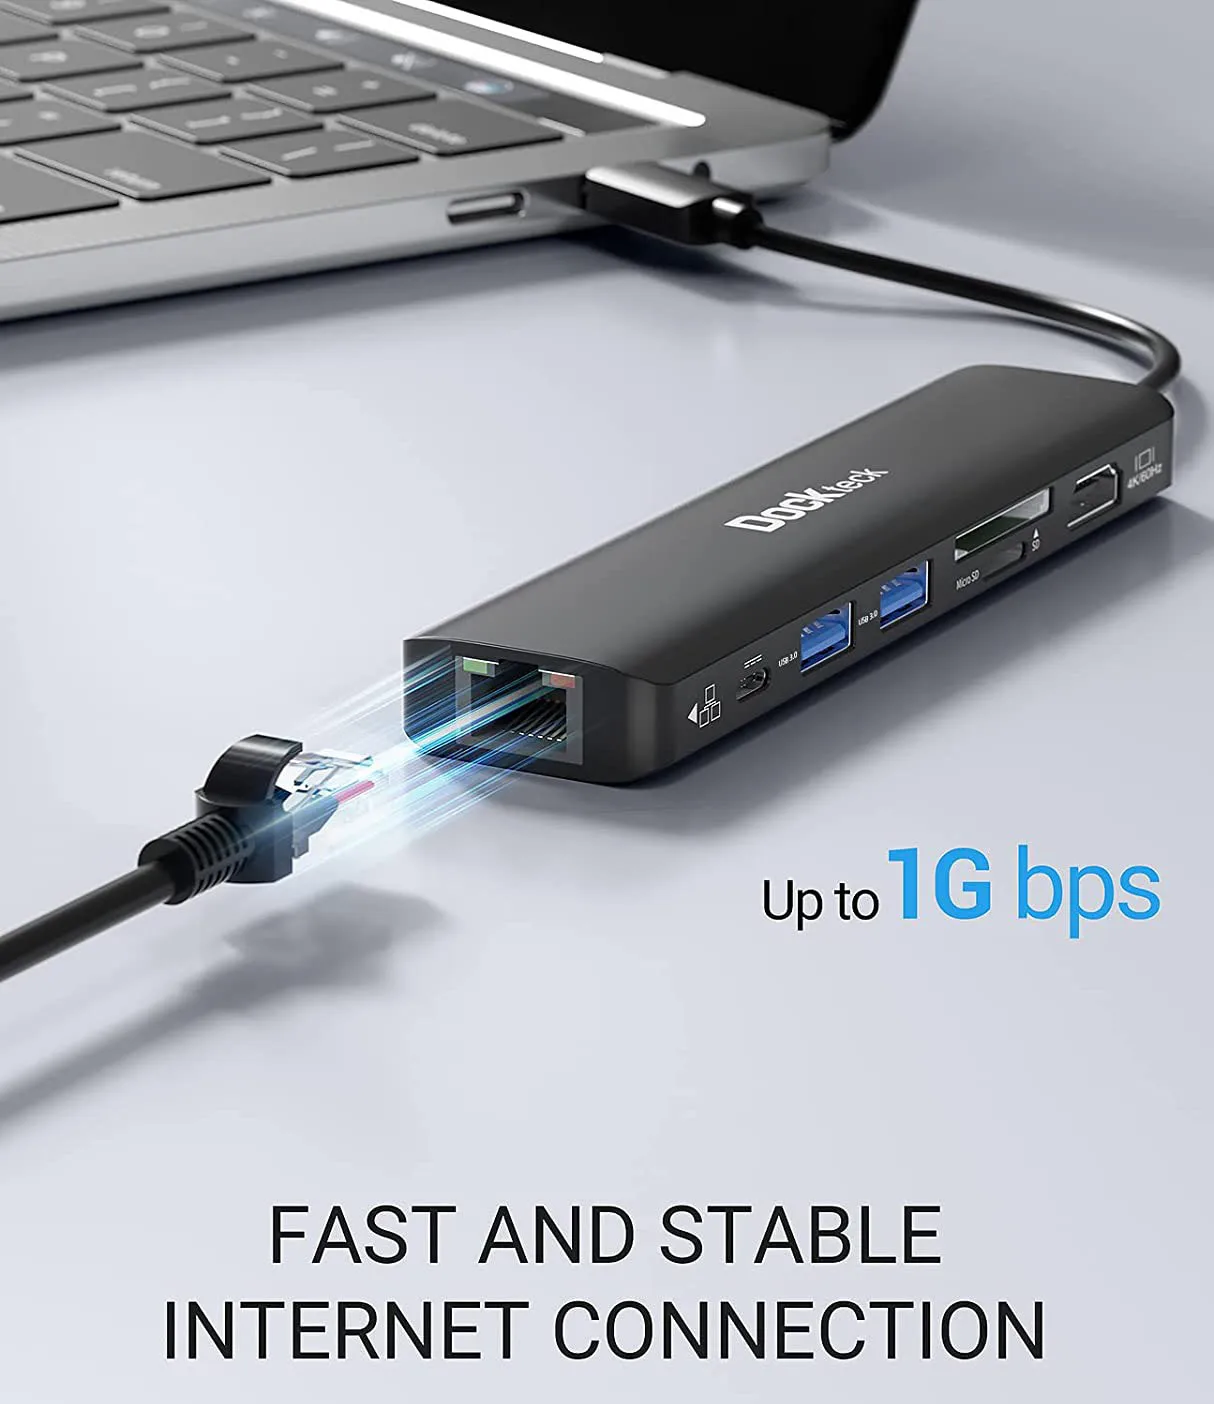 USB C Hub 7-in-1 Hub Dockteck with 4K 60Hz HDMI/1Gbps Gigabit Ethernet/100W PD/2 USB 3.0/SD/TFfor MacBook Pro/ Air iPad Pro XPS enlarge